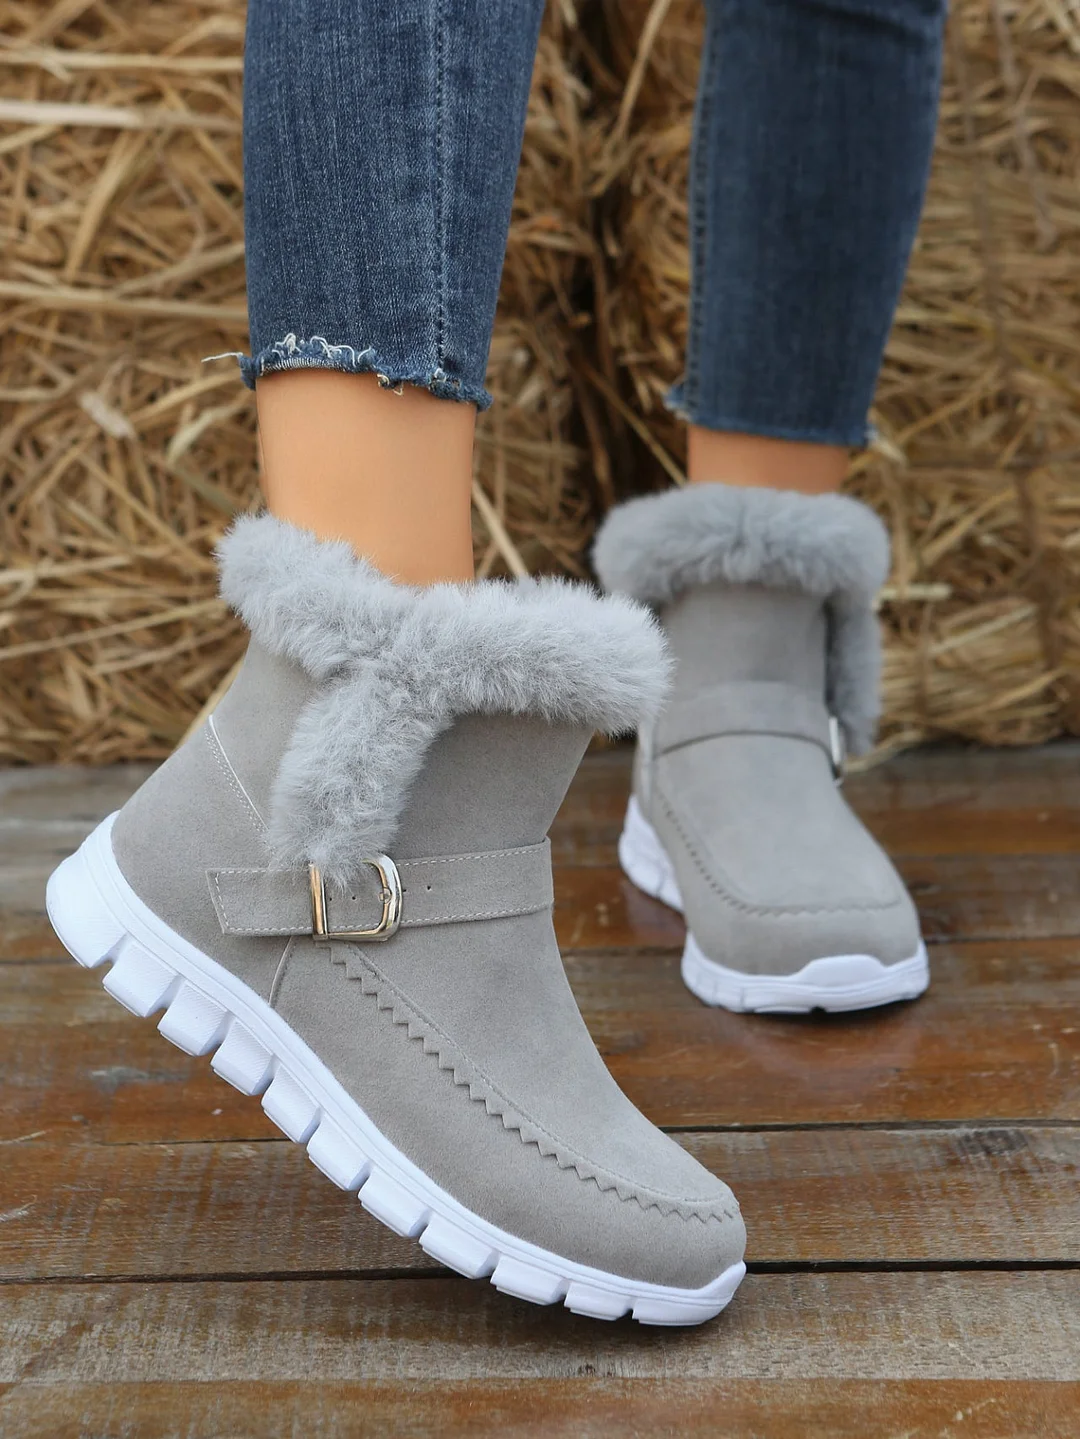 Orthopedic Women Boots Winter Fur Lining Extra Comfortable Warm Fashion Snow Boots